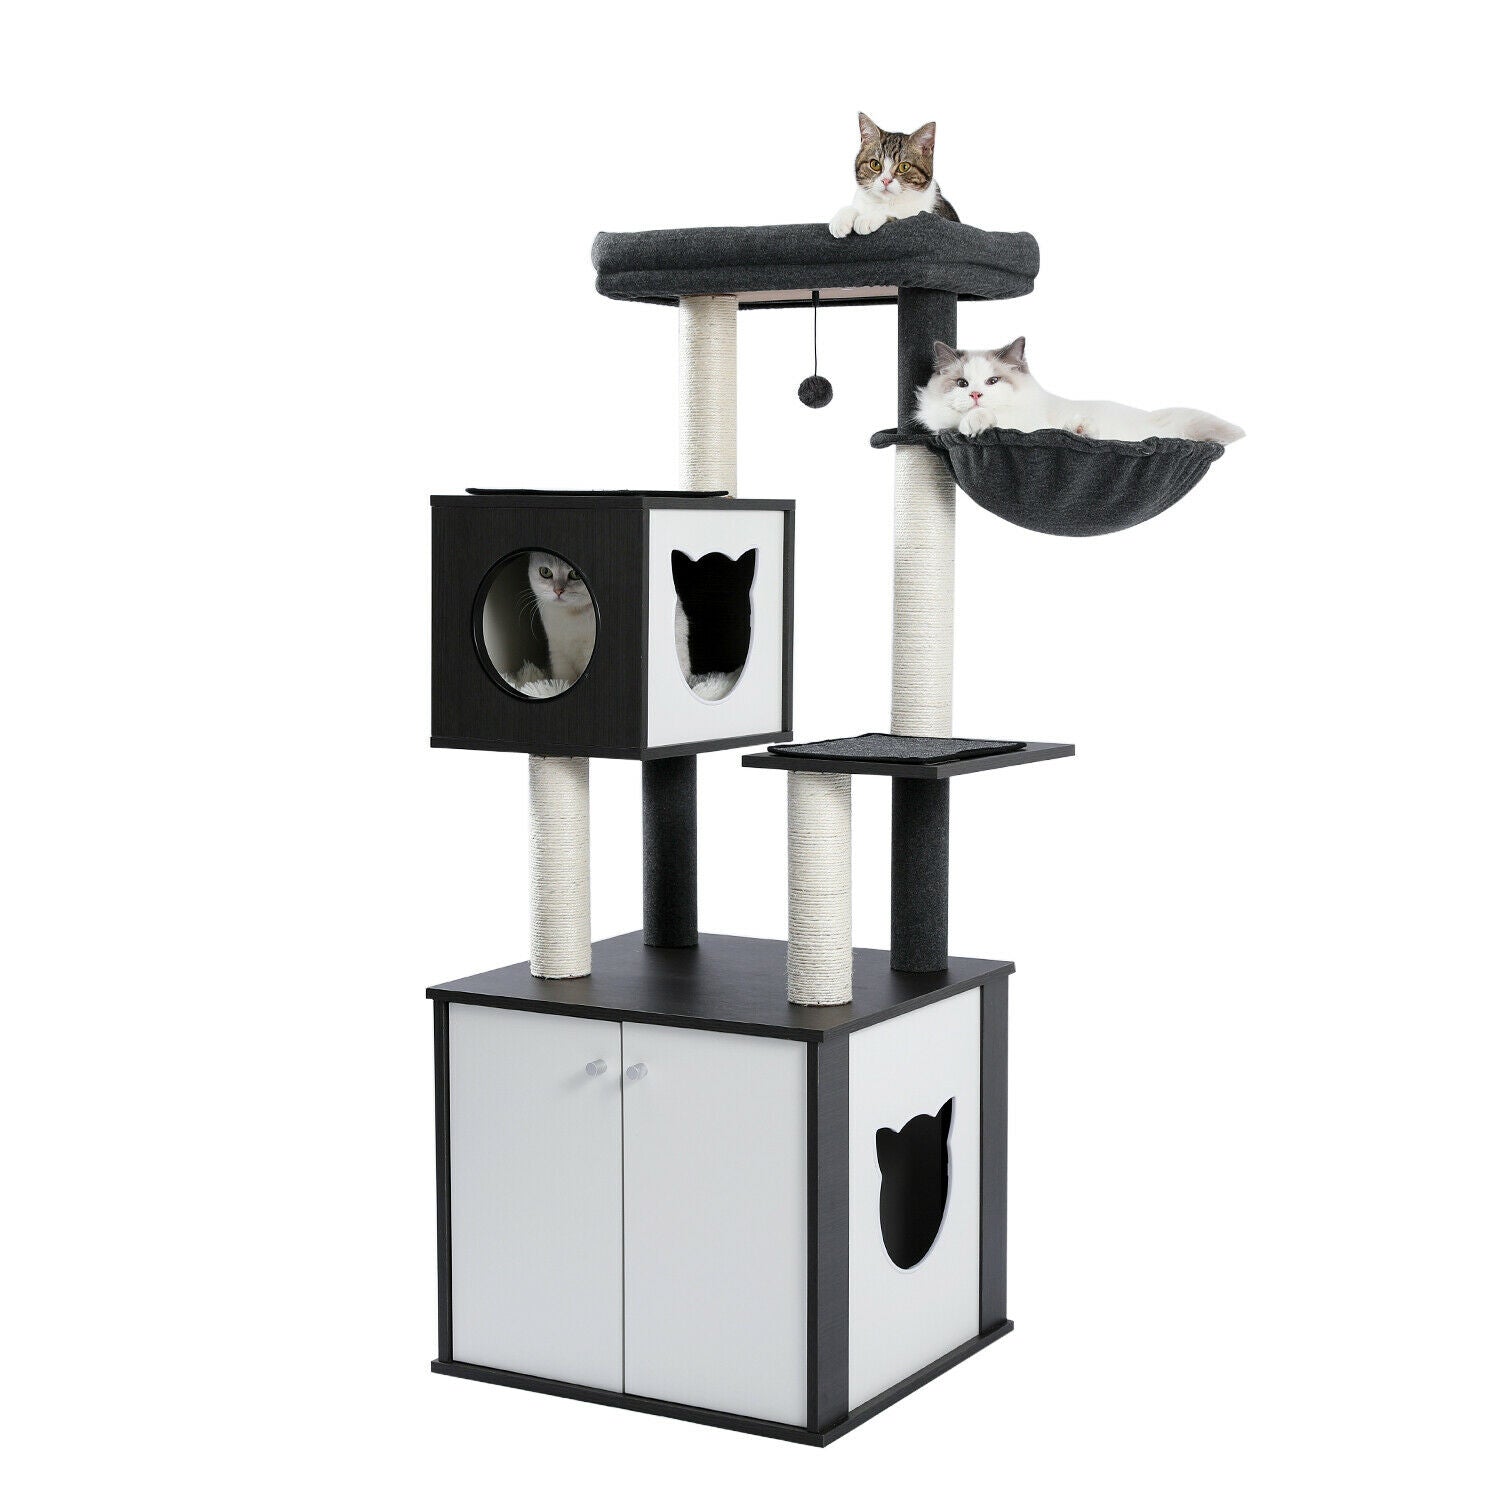 Modern Black All-in-One Cat Tree Tower with Multi-Functional Cat Litter Box House, Cat Condo, Hammock, and Scratching Post for Cats